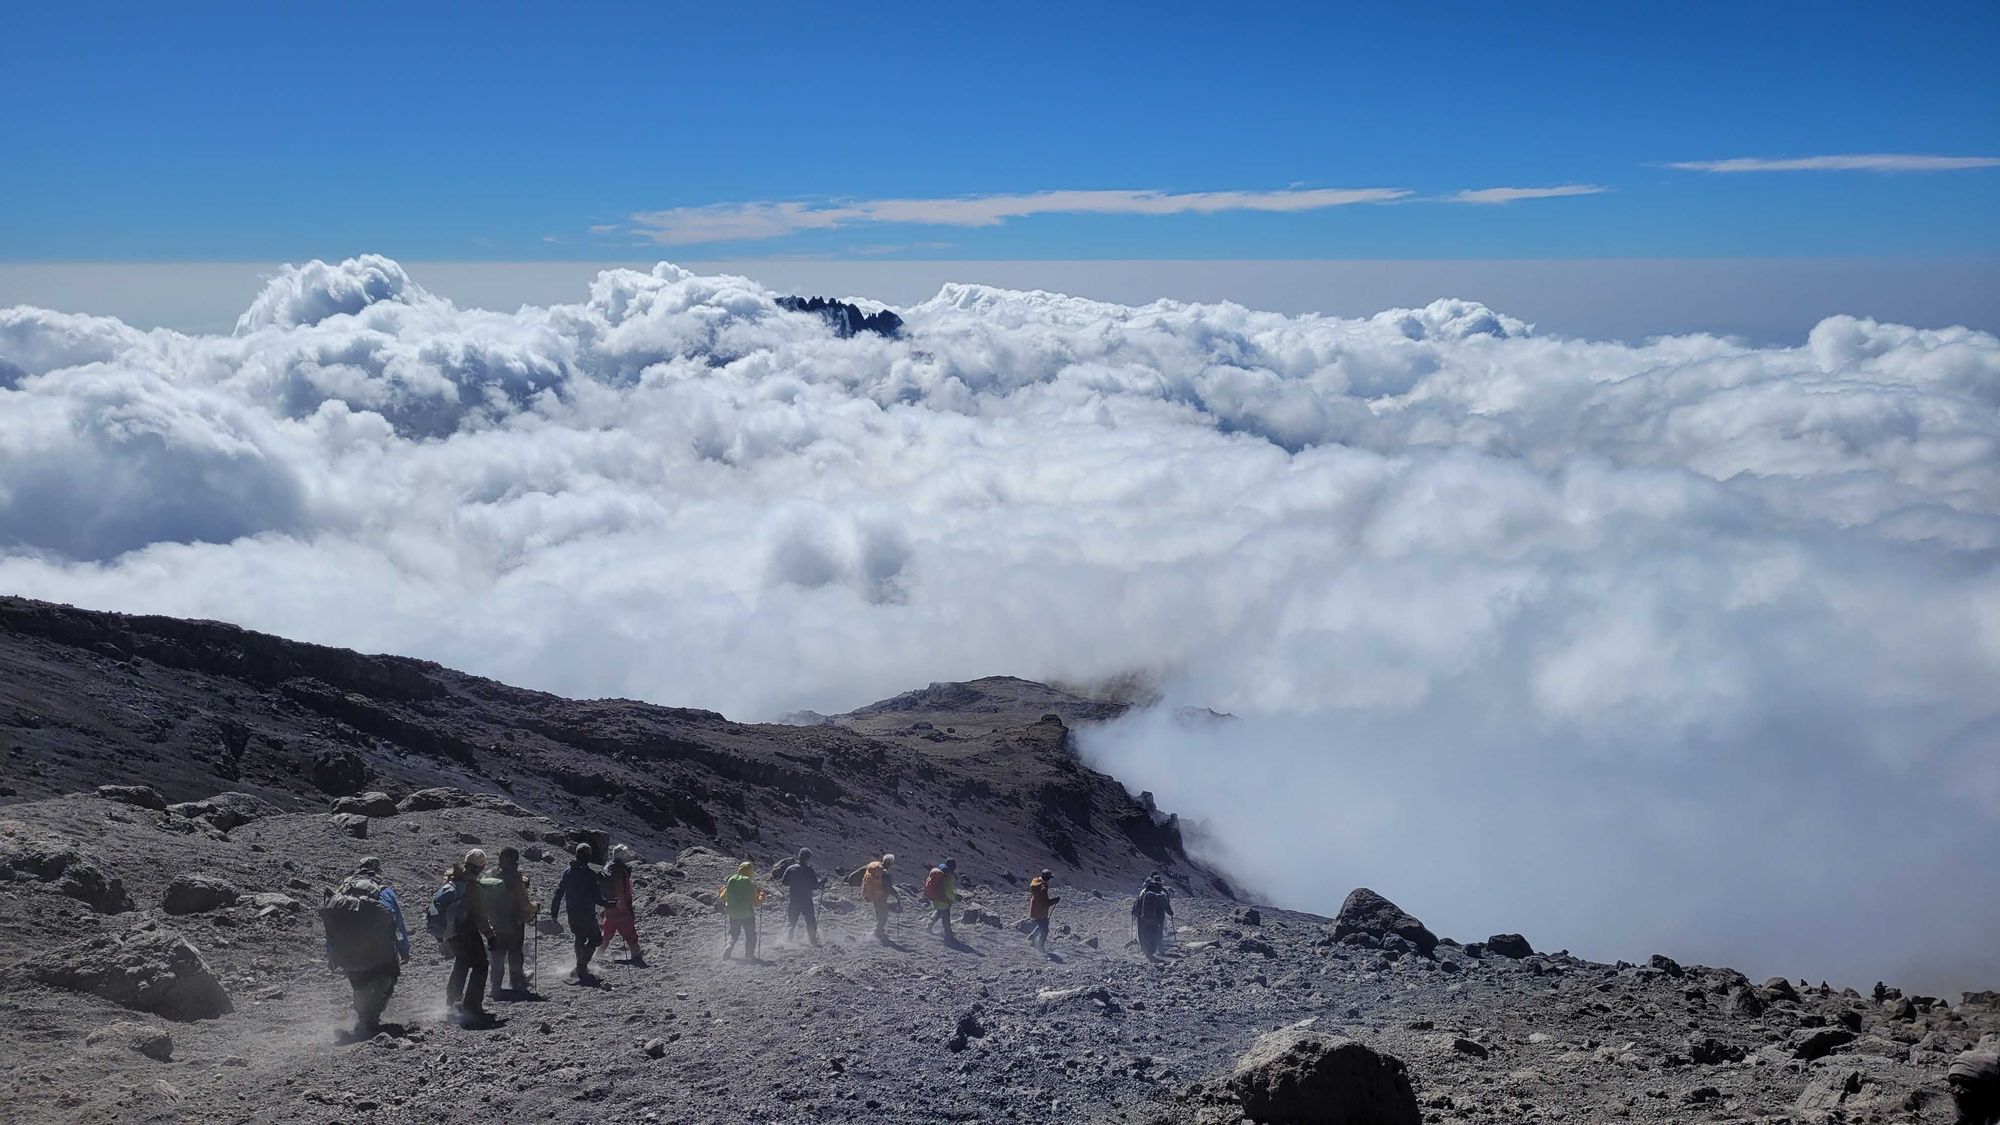 A line of trekkers following the dusty path down Kilimanjaro, above a blanket of clouds.